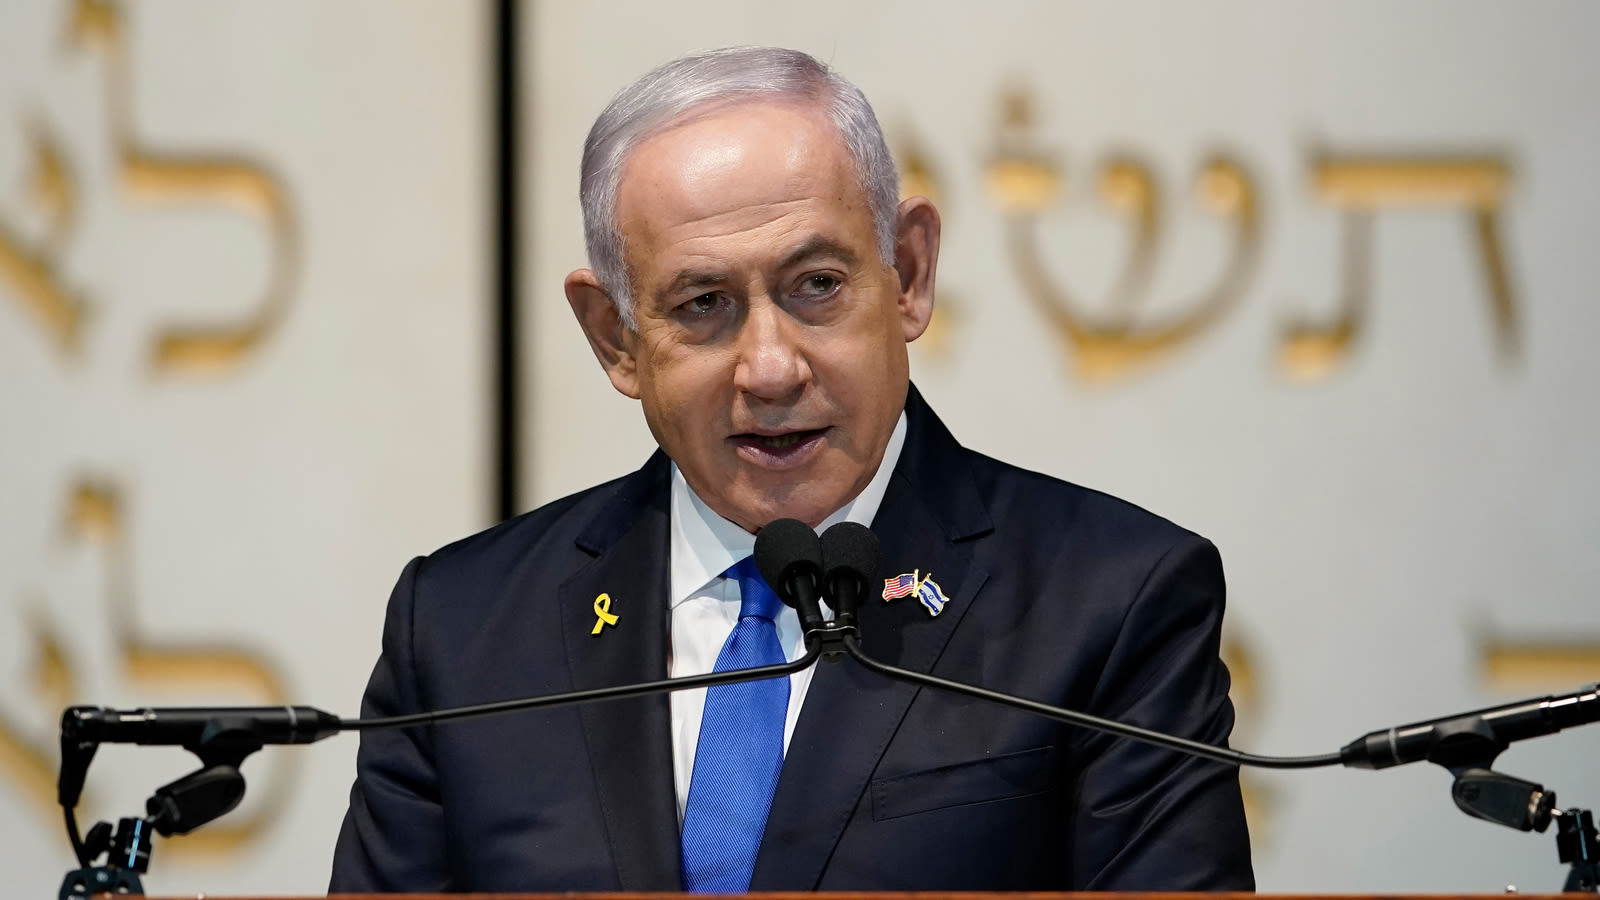 Netanyahu to address Congress, seeking to redirect American attention from Biden to the Middle East